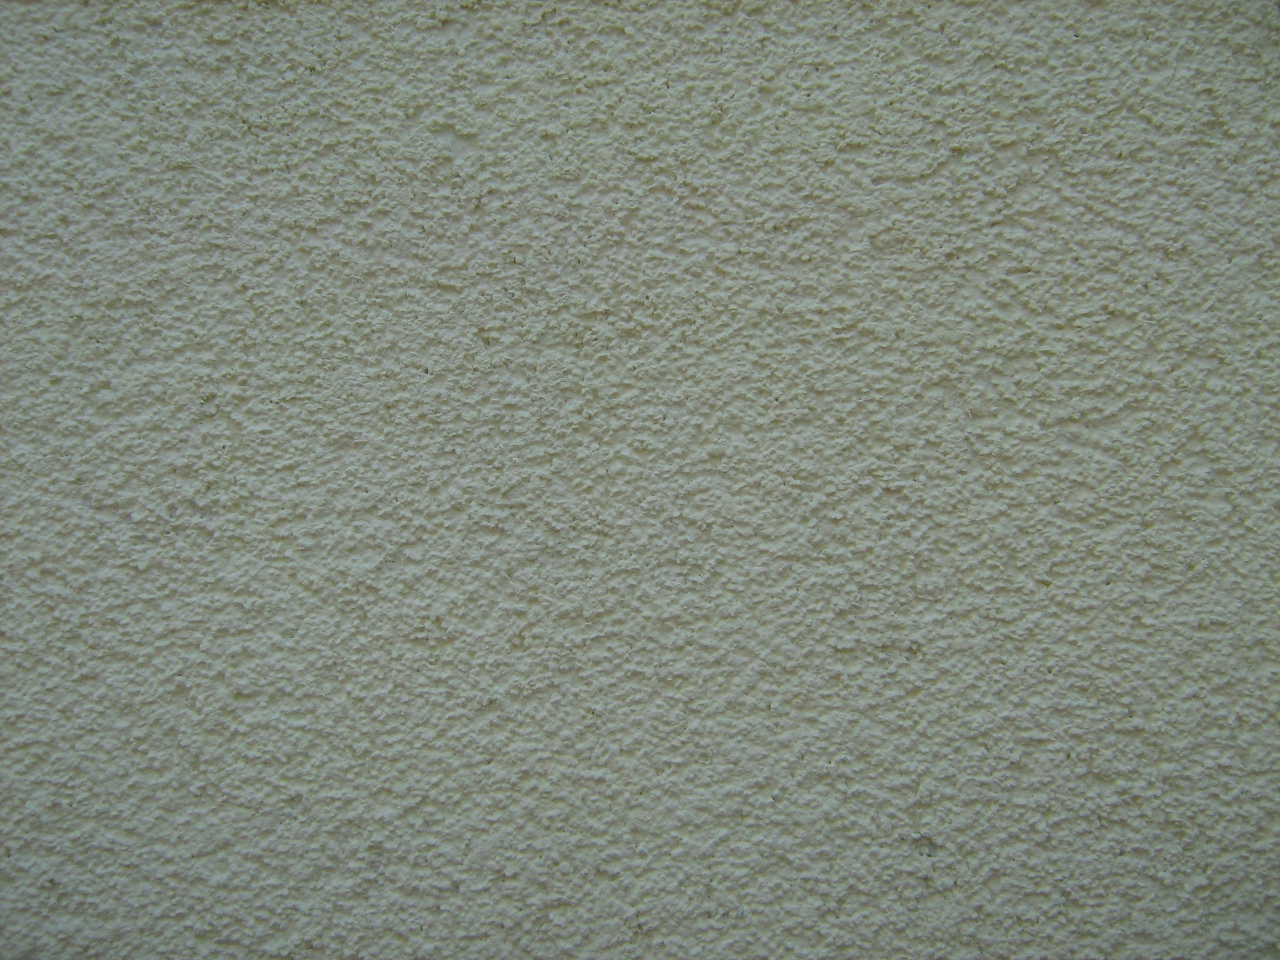  stucco texture download photo background stucco background texture